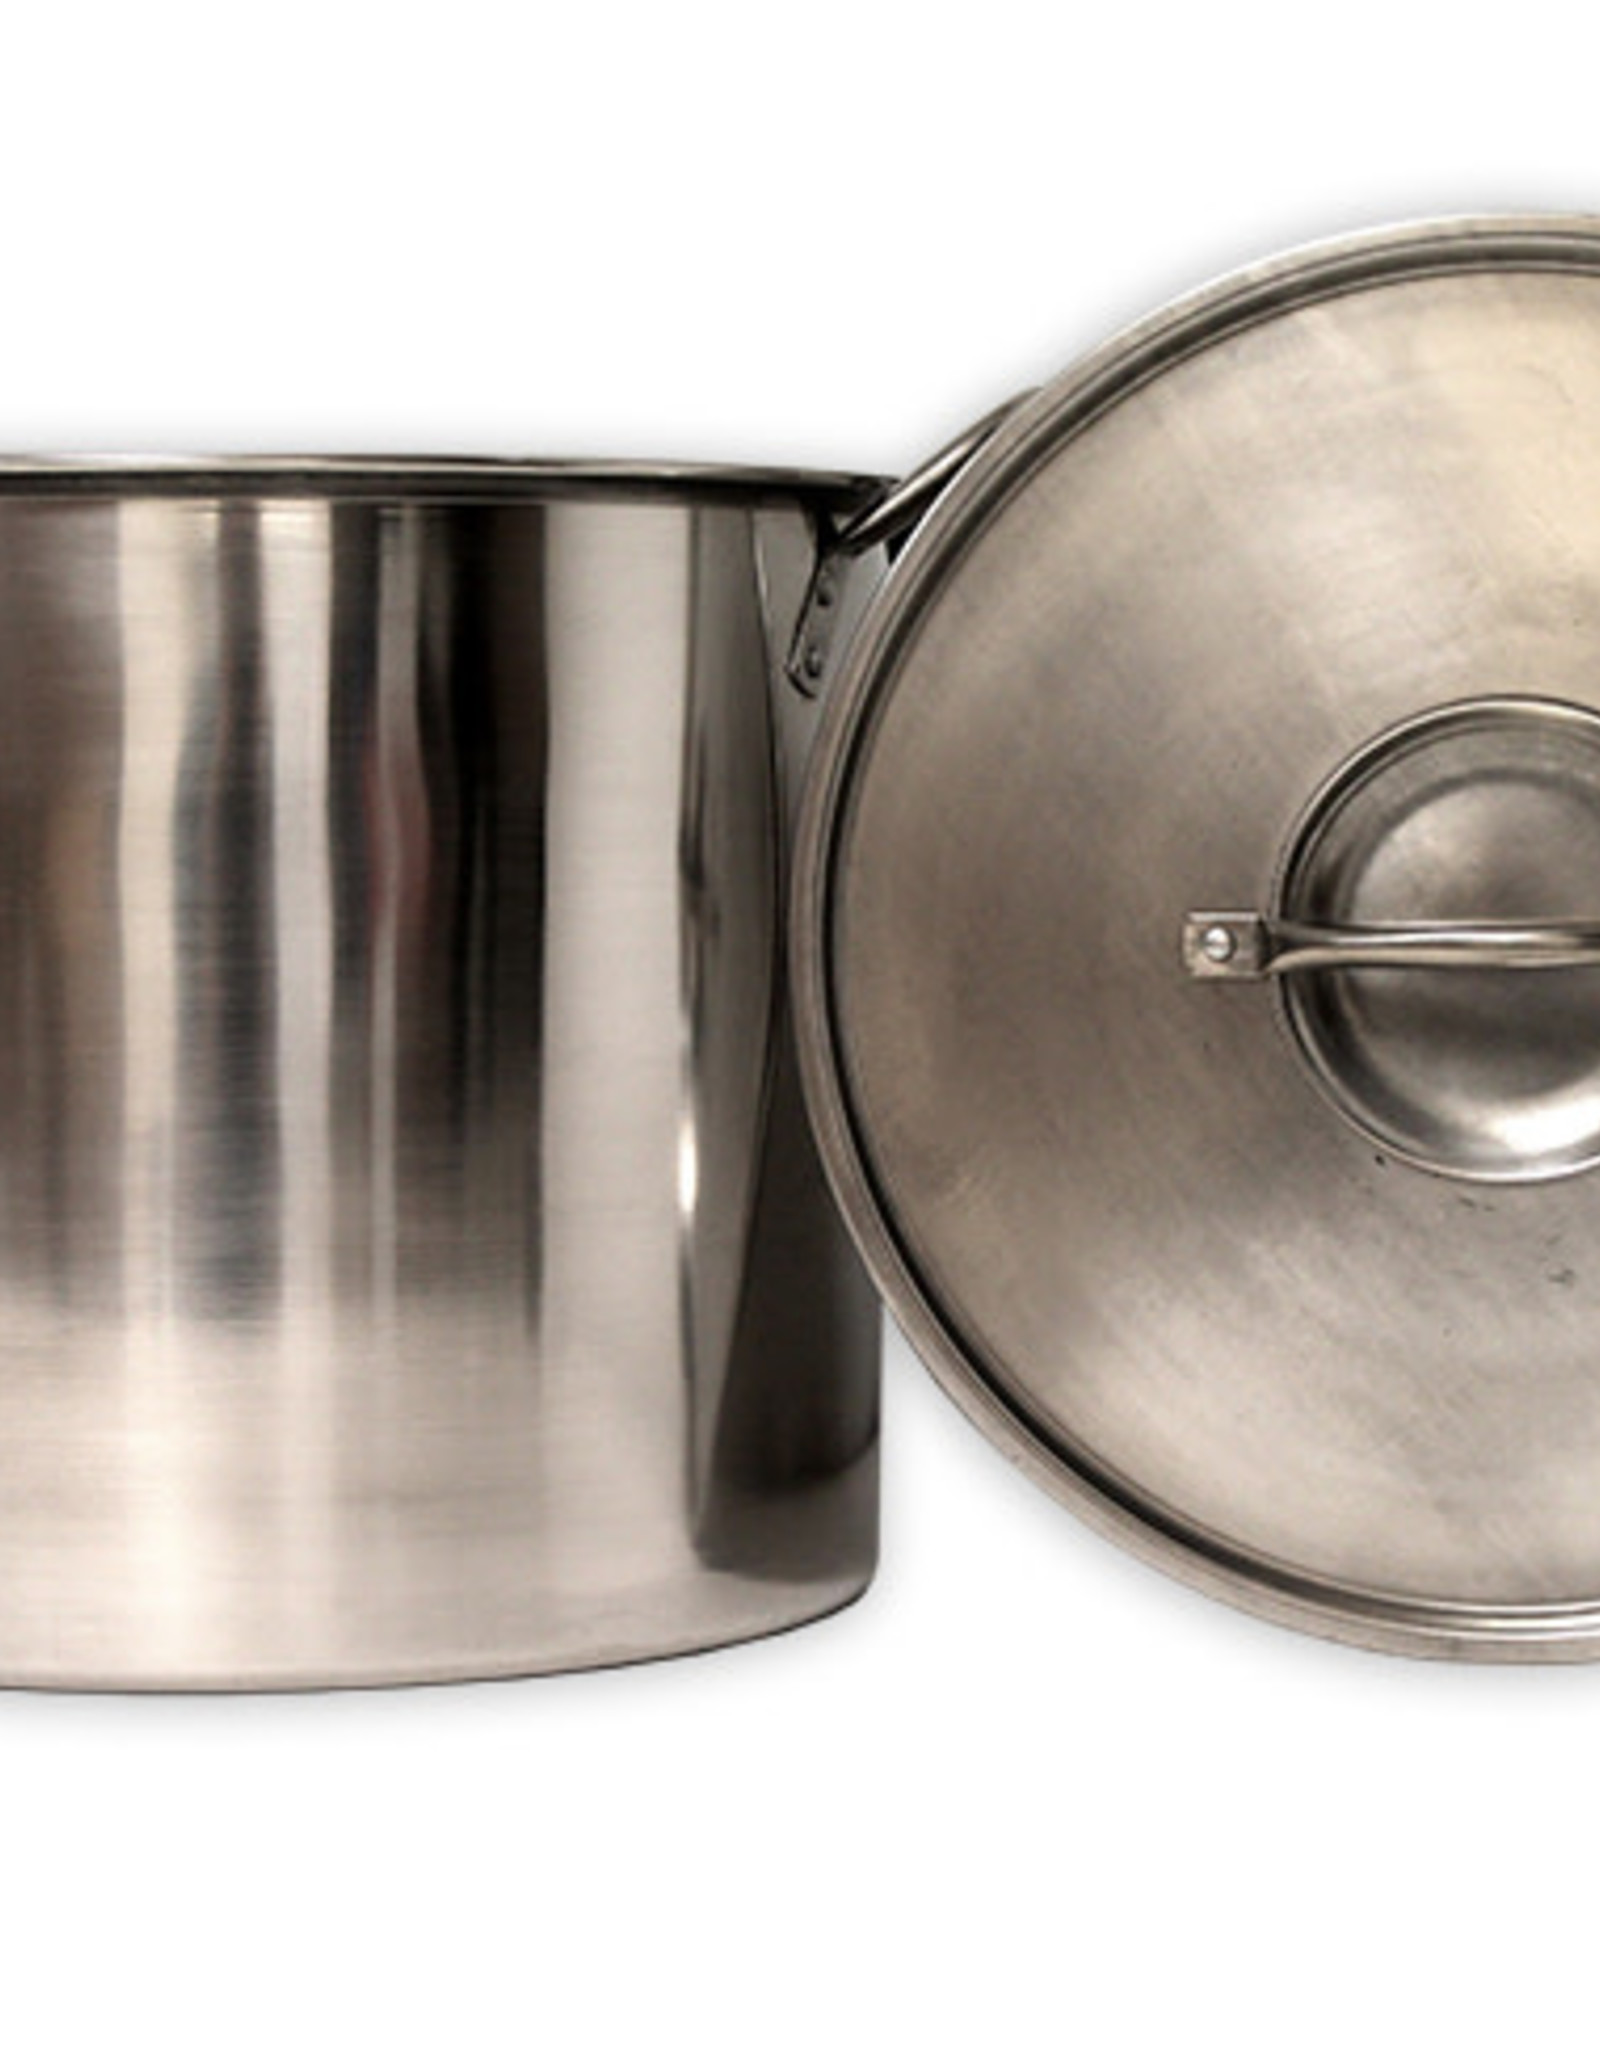 ECO-POT 20 QUART STAINLESS STEEL BOILING POT WITH LID